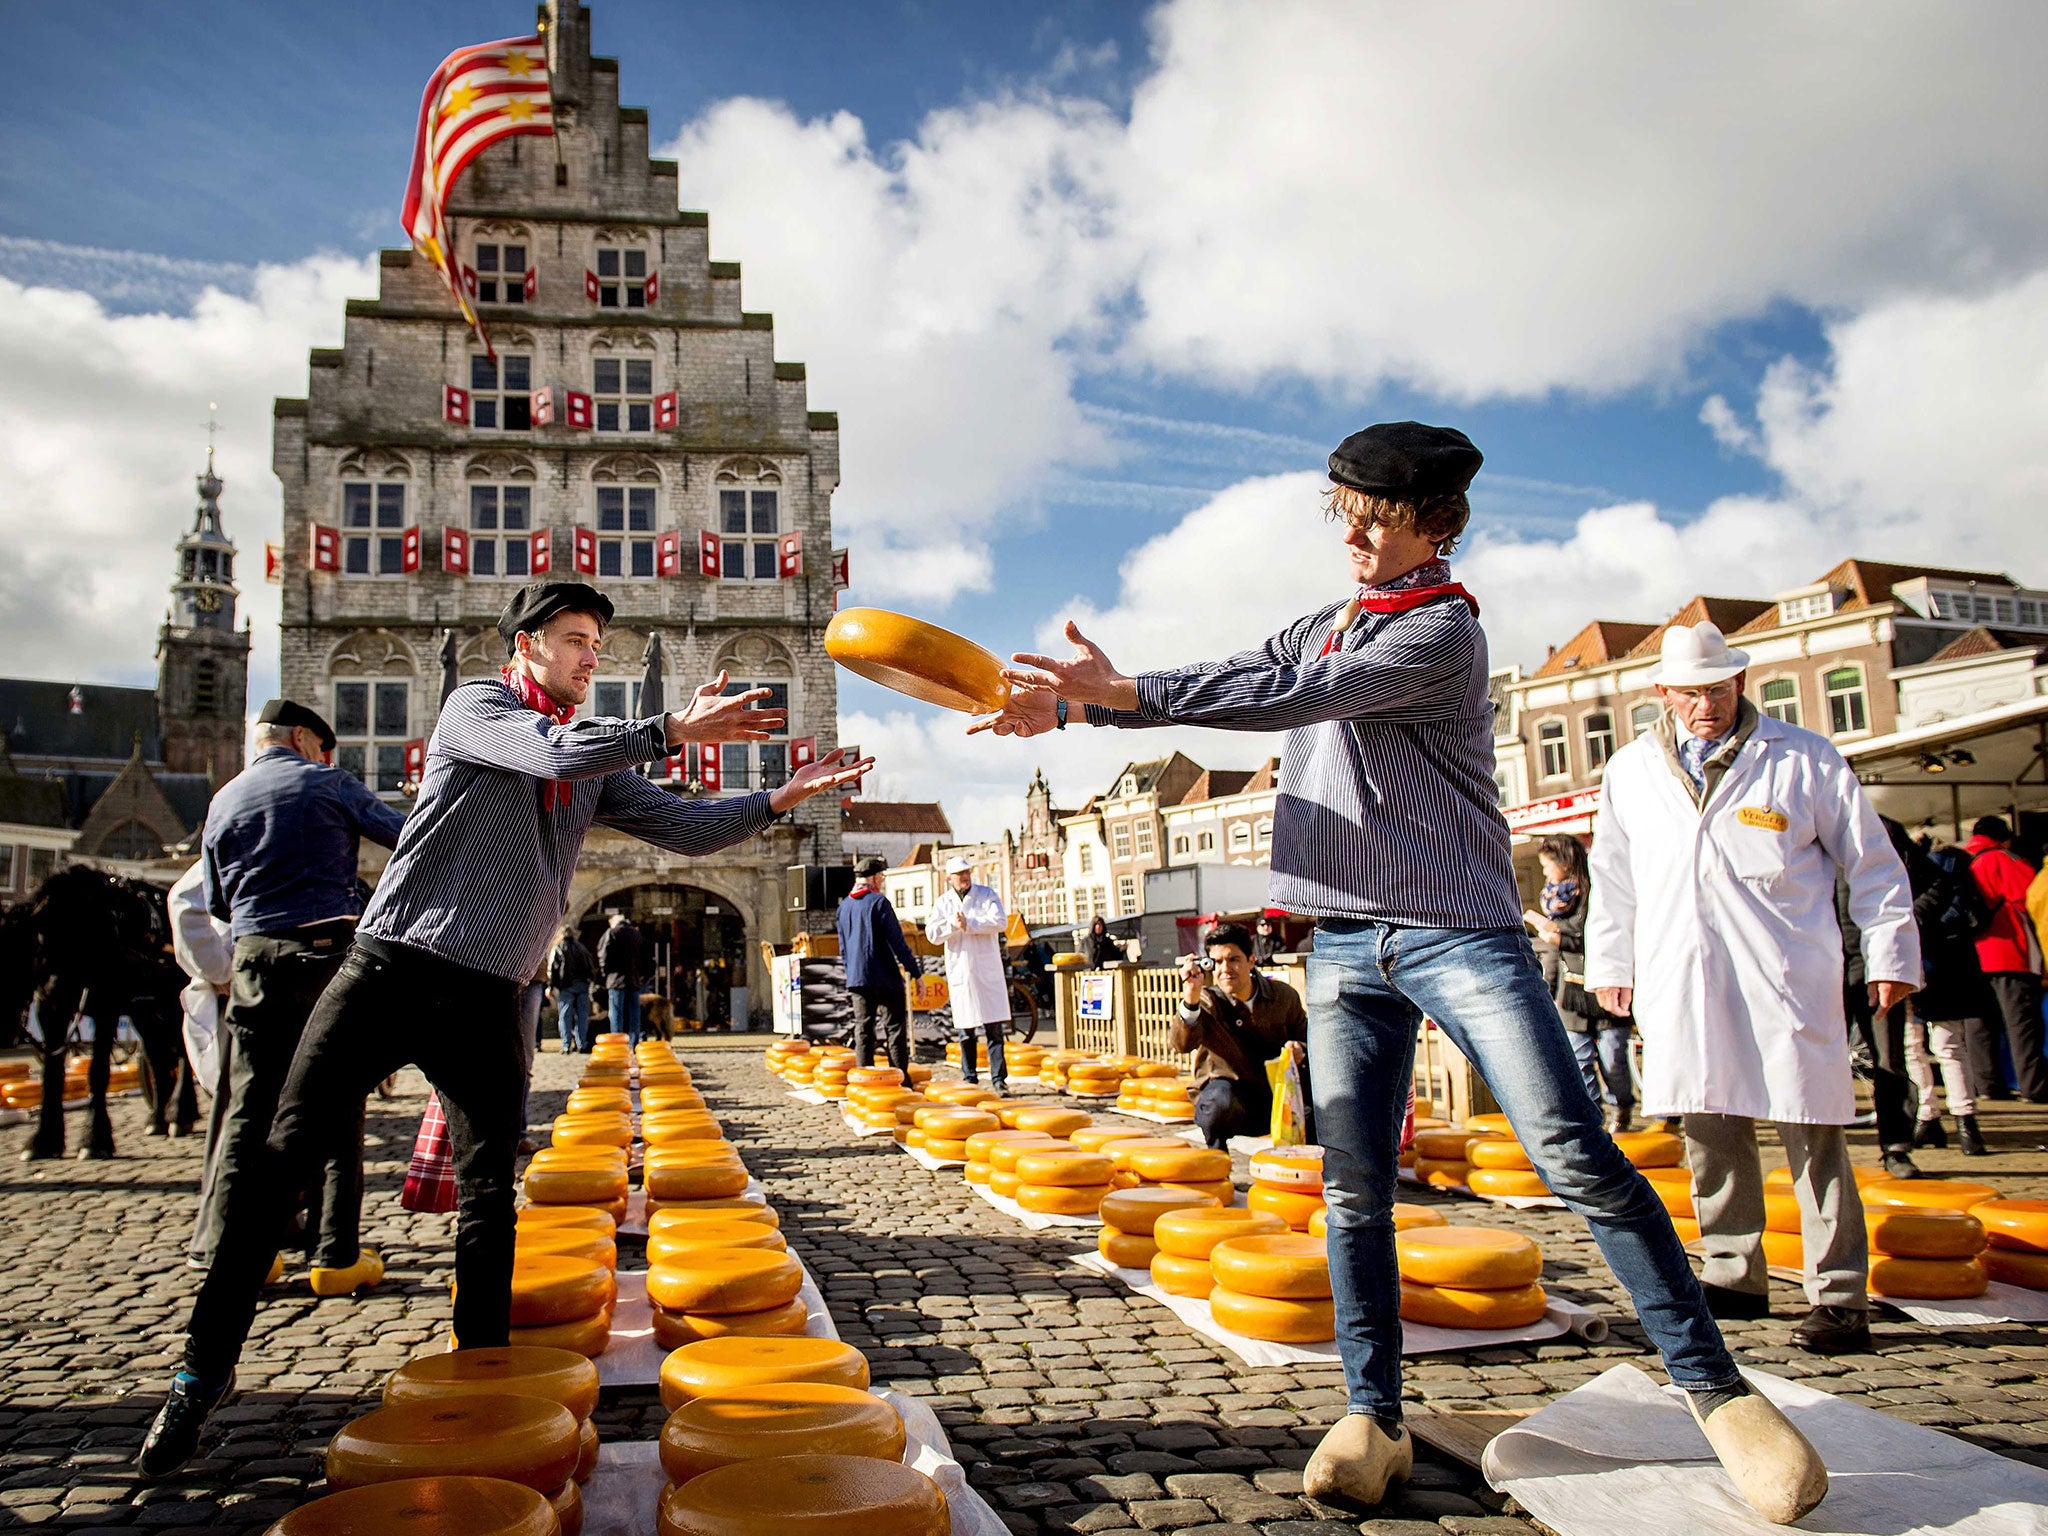 The Dutch cheese season is opened at the first Gouda cheese market of the year in Gouda, The Netherlands